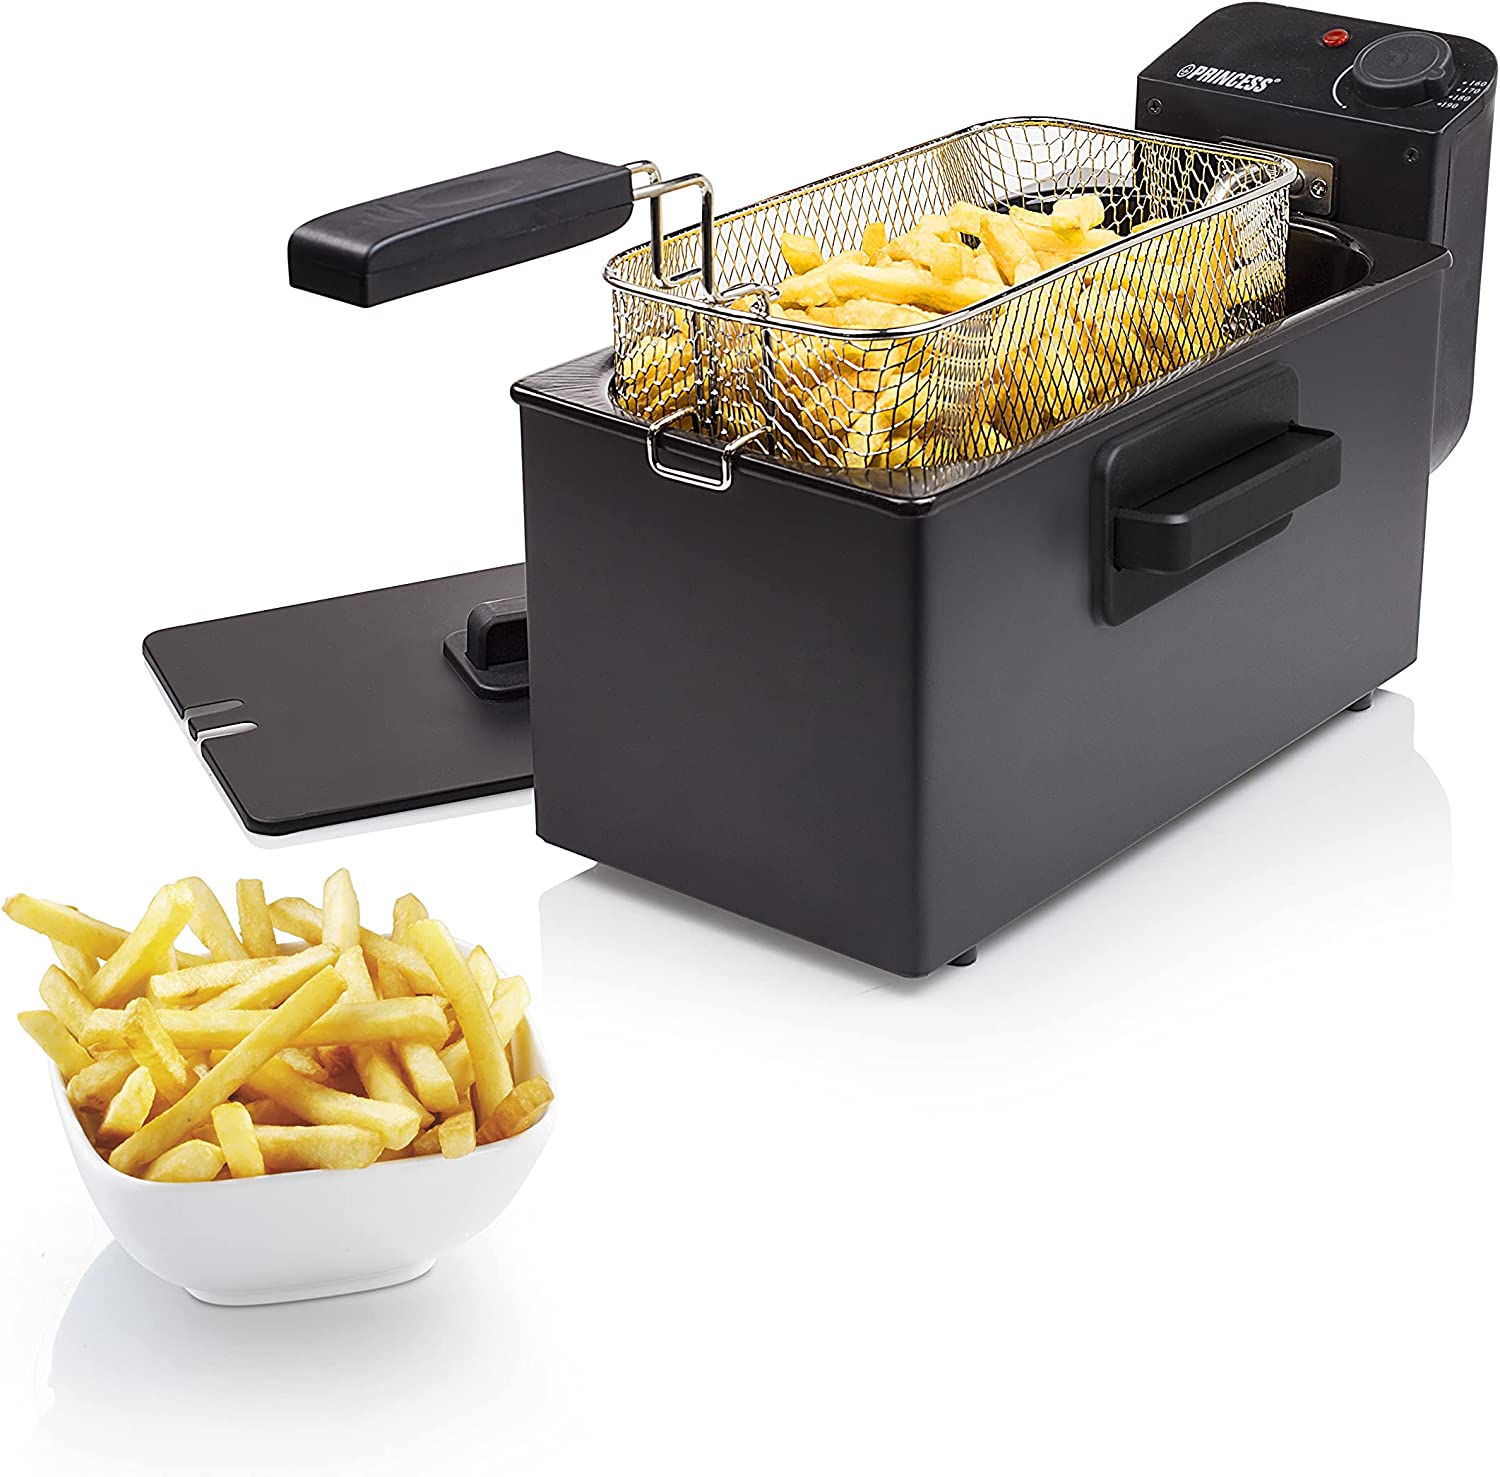 Princess 182727 Stainless Steel Fryer (Black), 3 Litres (2000 Watt) with Cold Zone Function, Black